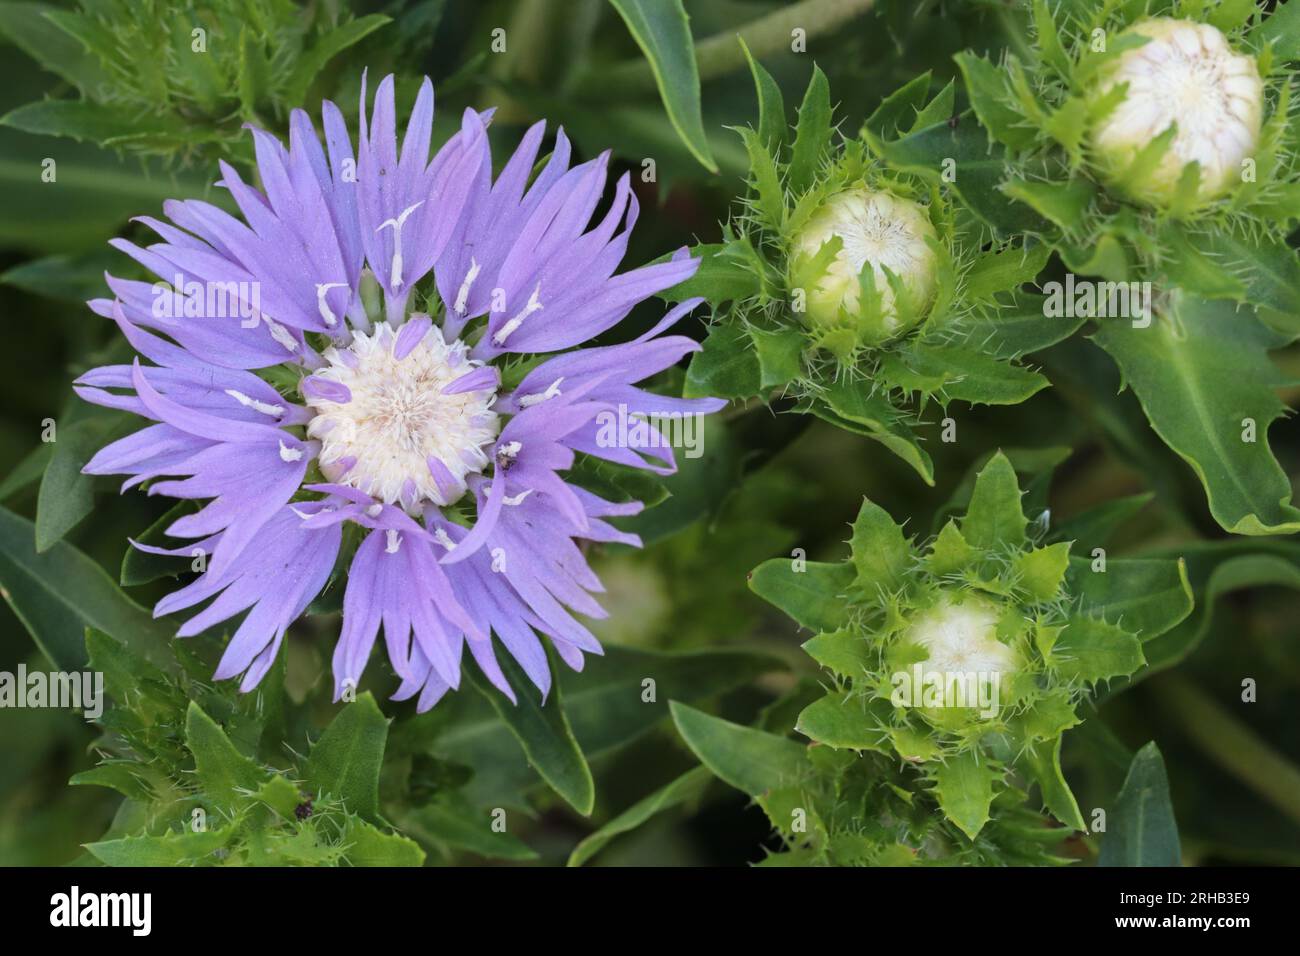 View of the wide-open flower of a blue Stokesia laevis and some still closed flowers in a garden bed, view from above Stock Photo